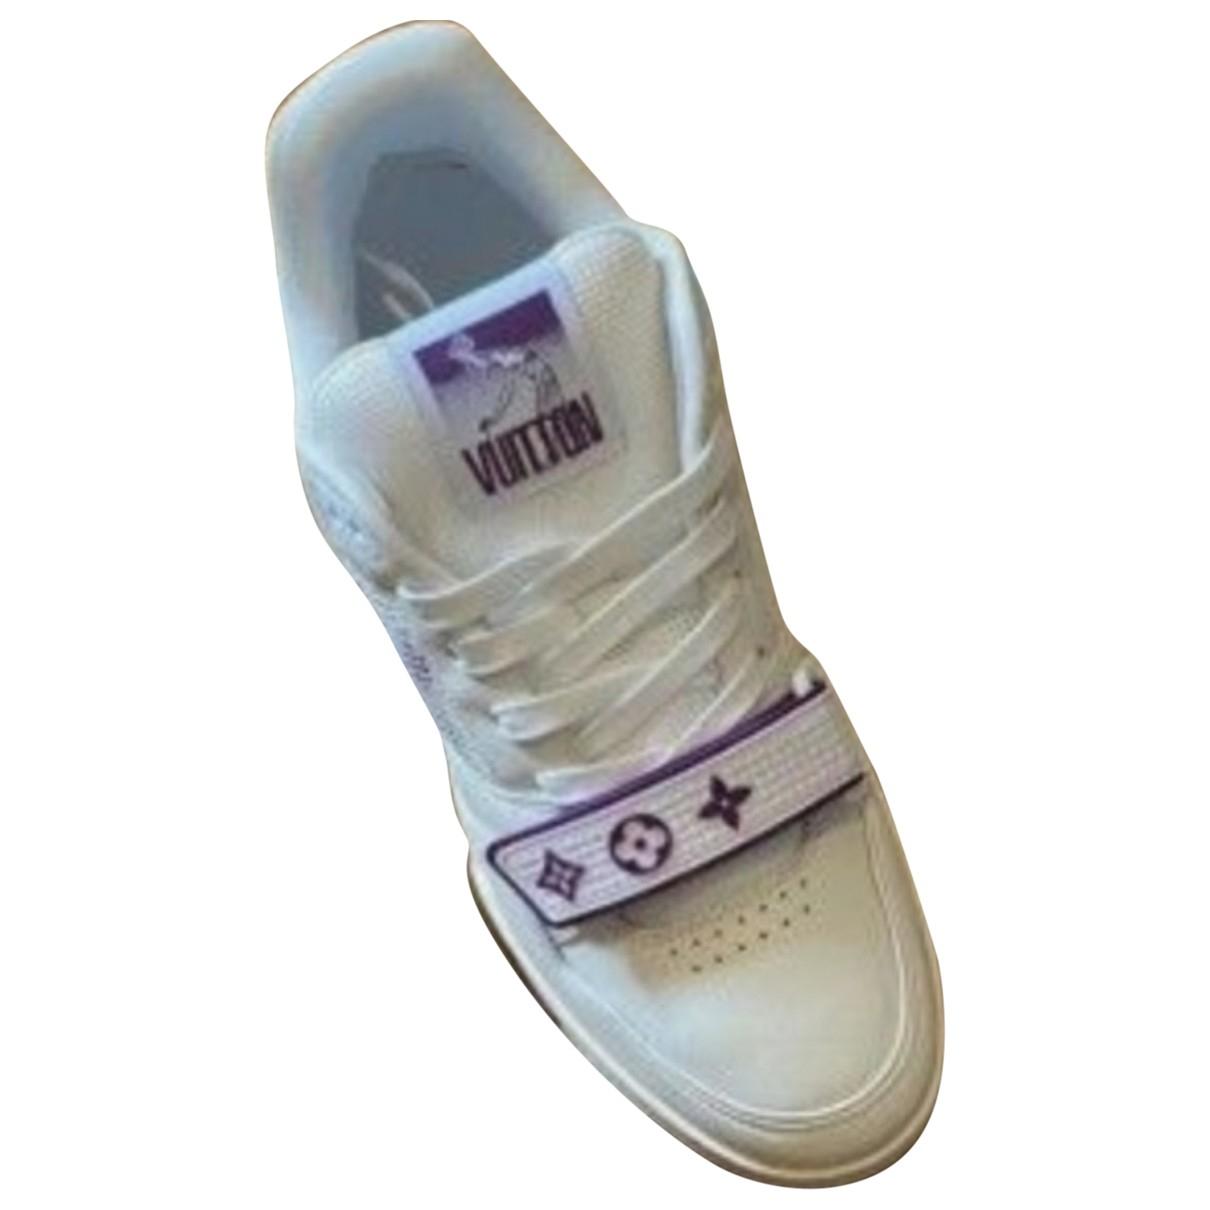 Lv trainer leather low trainers Louis Vuitton Purple size 40.5 EU in  Leather - 35174095